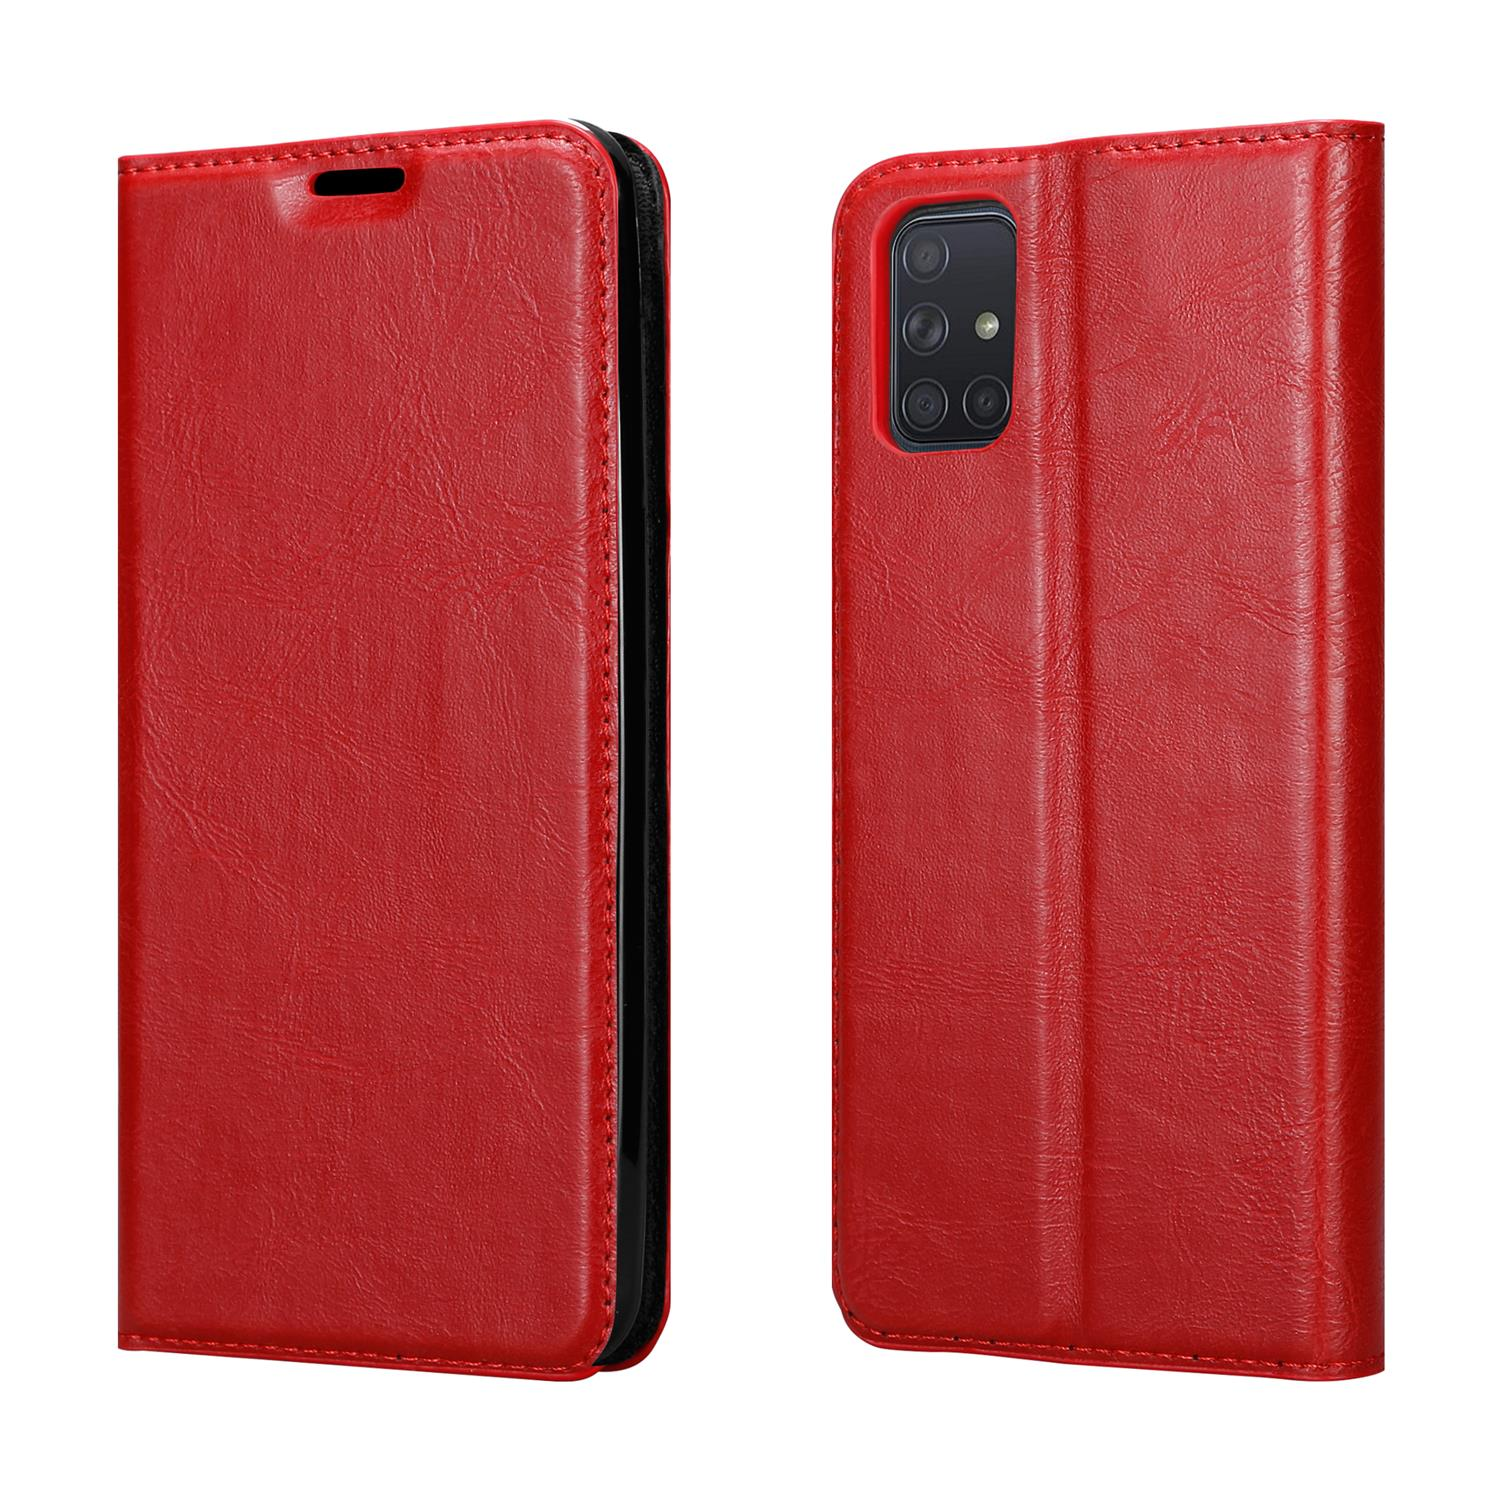 5G, Book Invisible Galaxy CADORABO ROT Samsung, 4G / Hülle APFEL Bookcover, A72 Magnet,